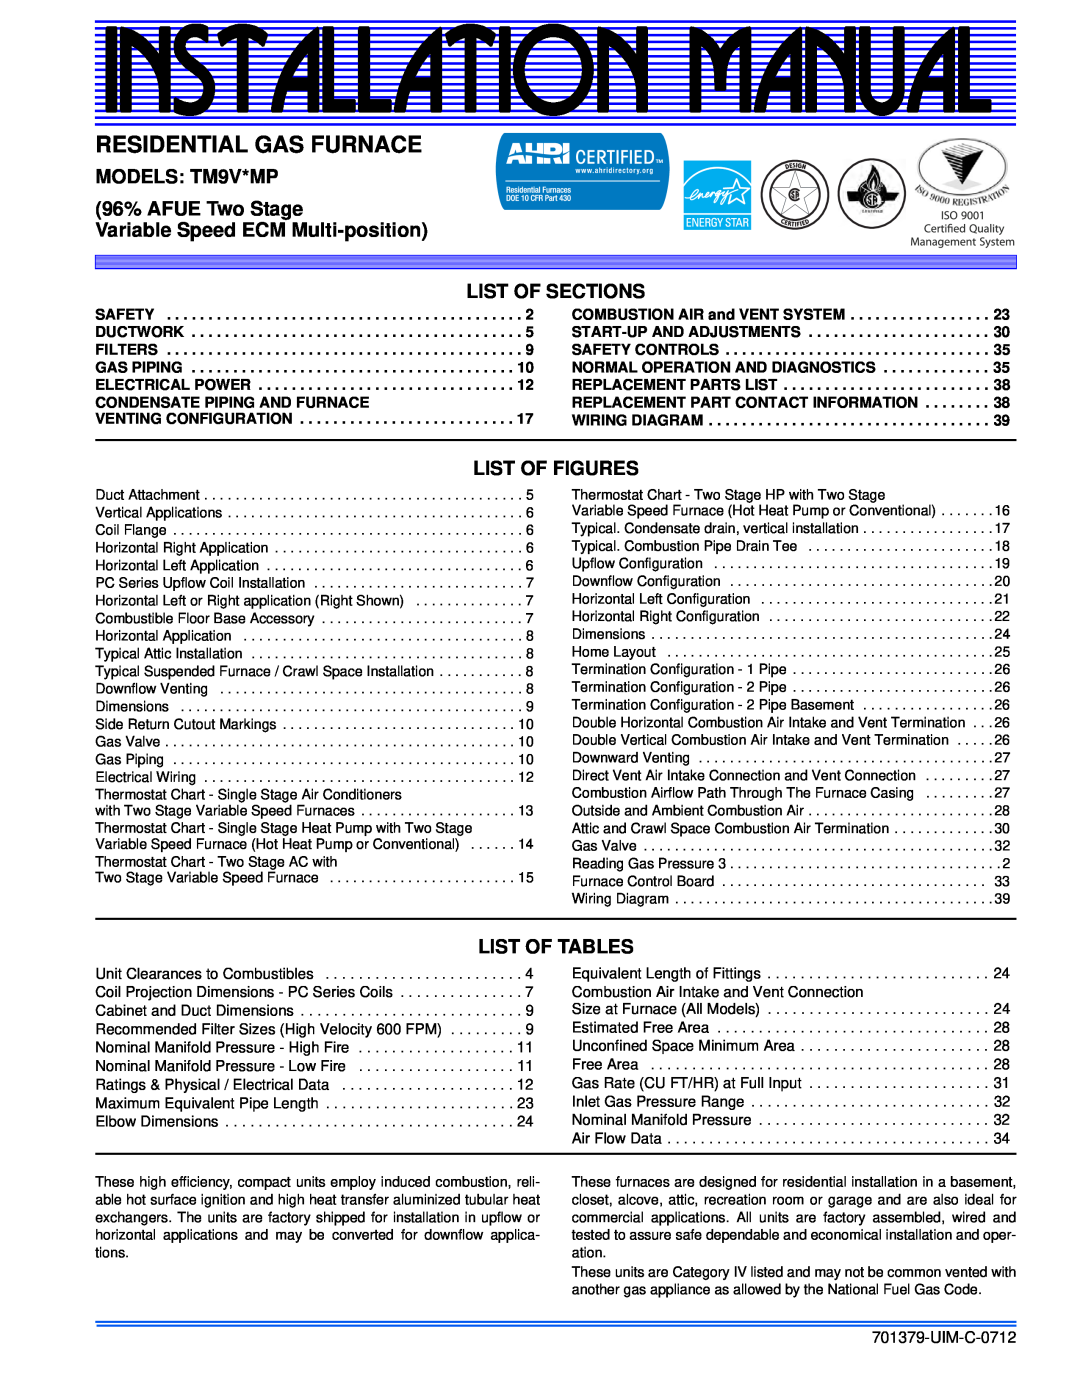 Johnson Controls TM9V*MP installation manual Installation Manual, Residential Gas Furnace, List Of Sections, UIM-C-0712 